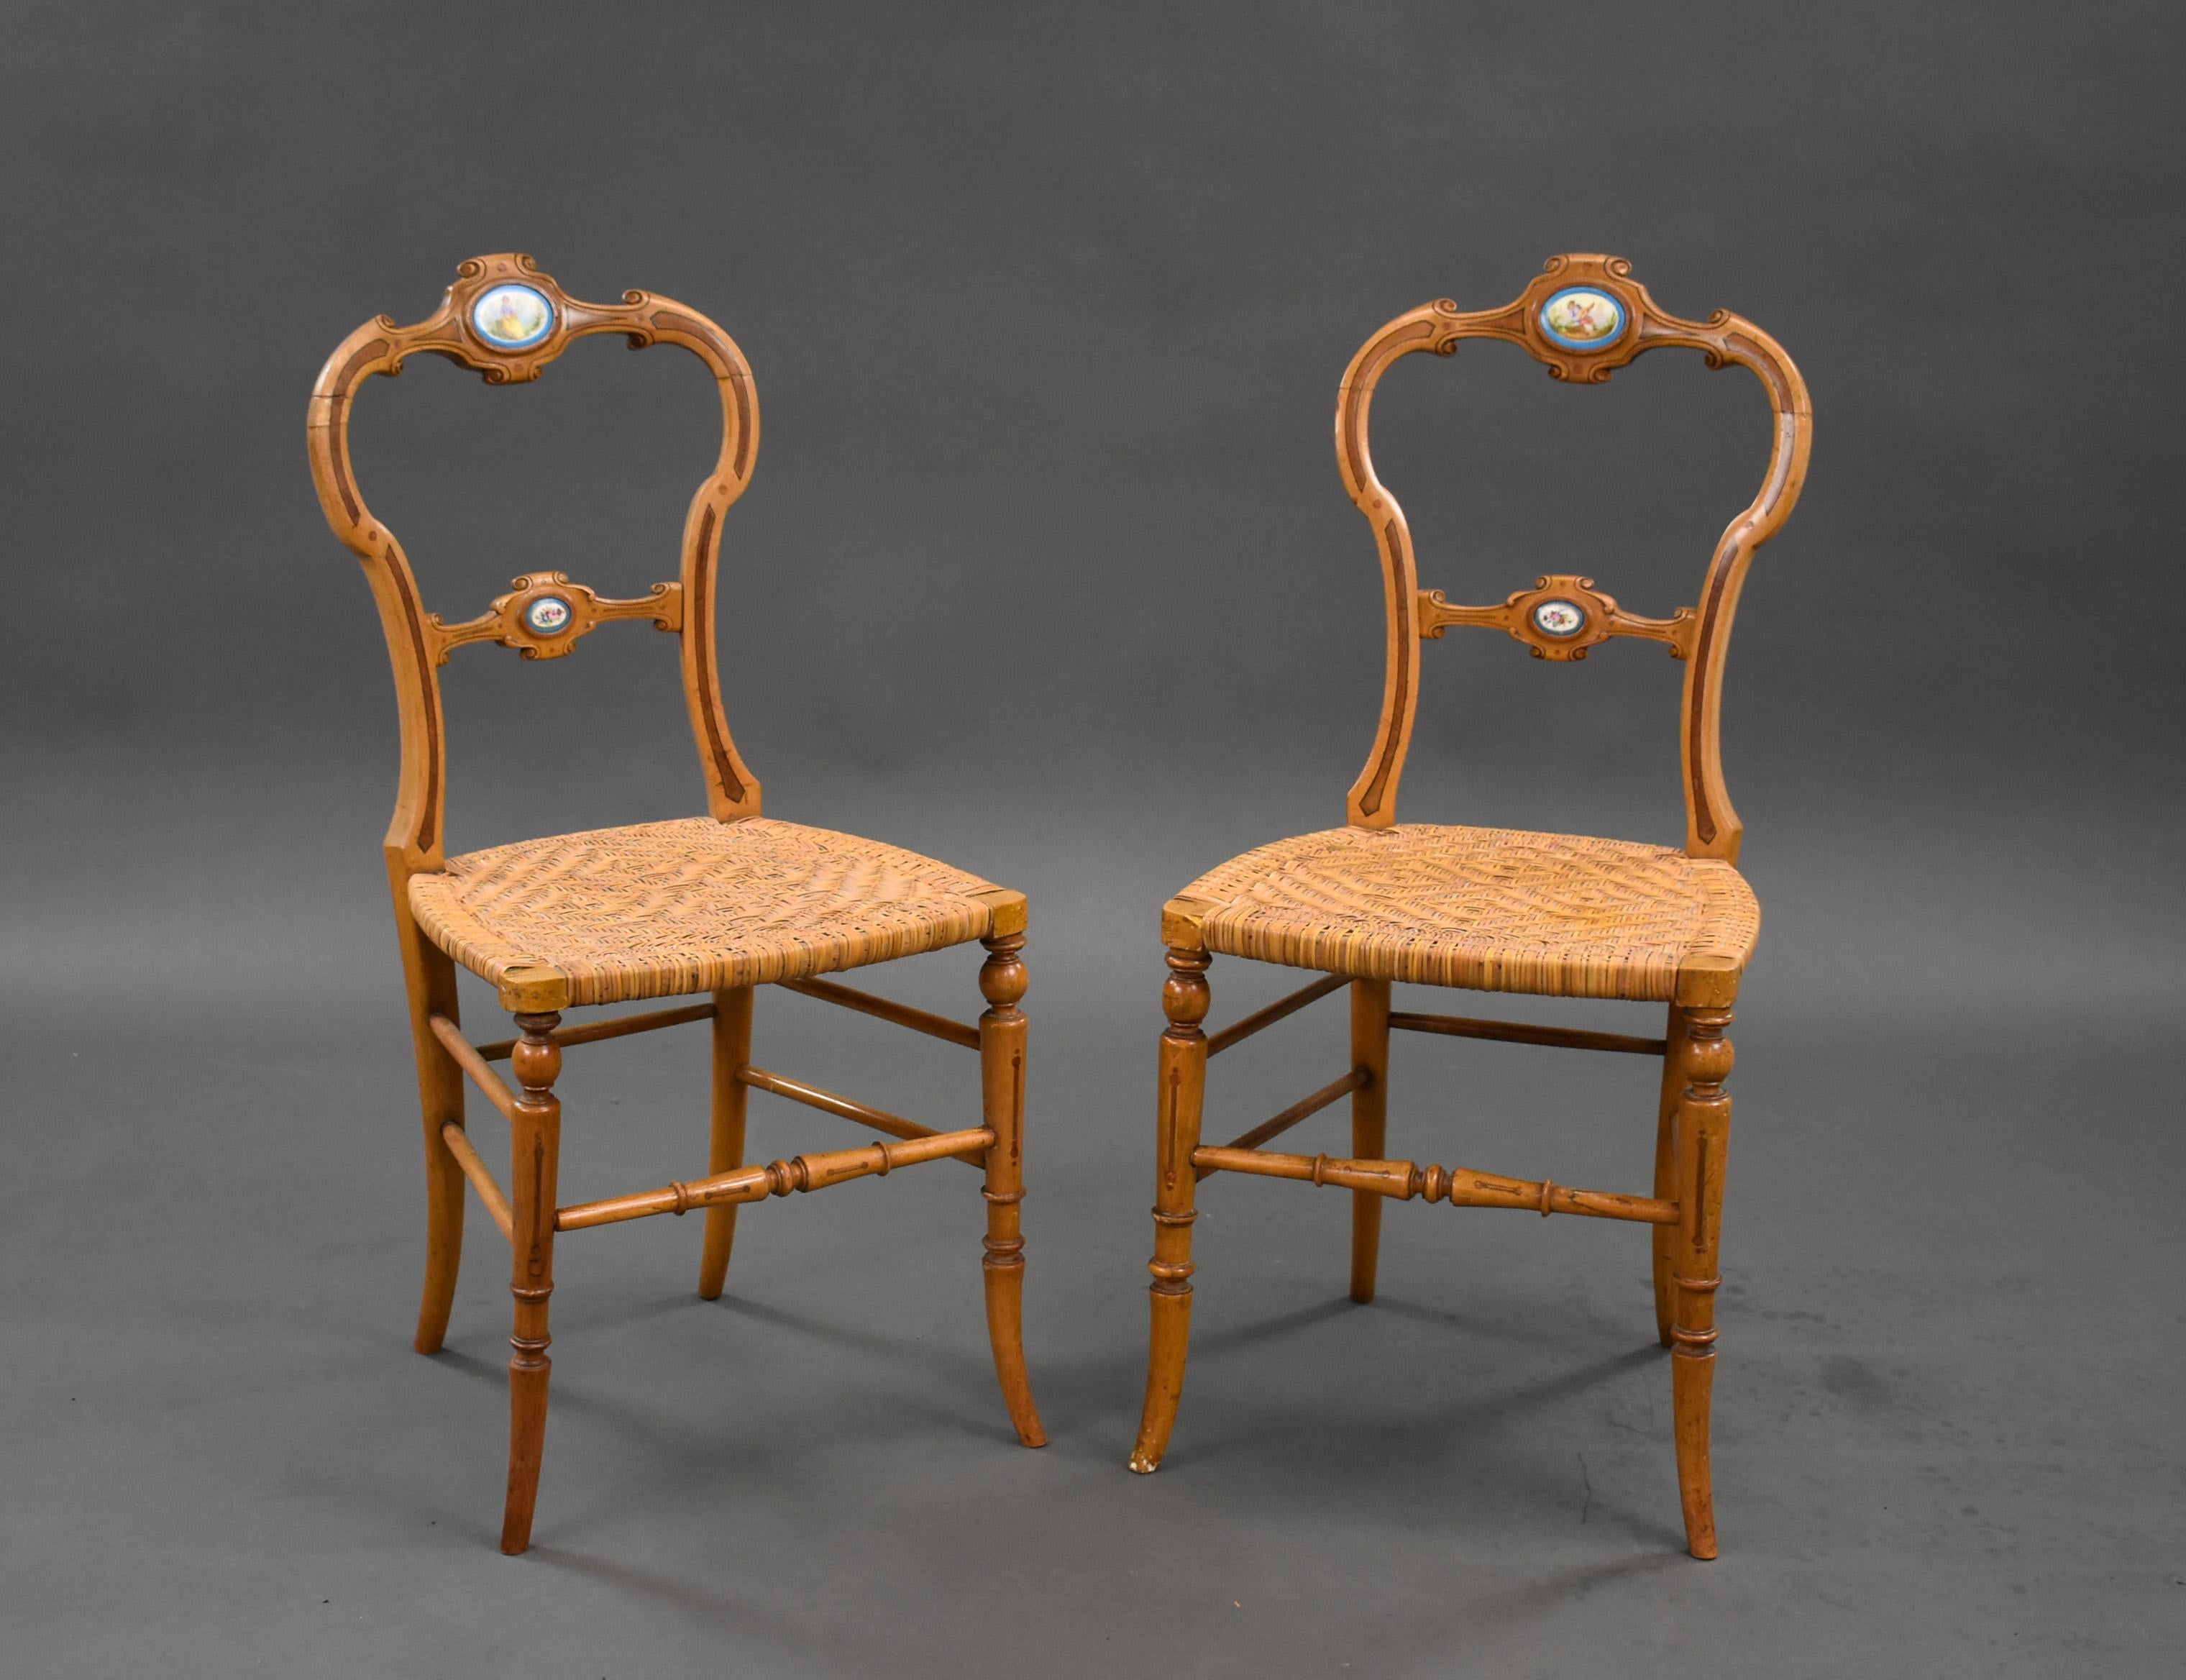 For sale is a good quality pair of Victorian walnut inlaid salon chairs, each having sevres style plaques, both chairs remain in very good condition showing minor signs of wear commensurate with age and use. 

Measures: Width: 41cm Depth: 41cm